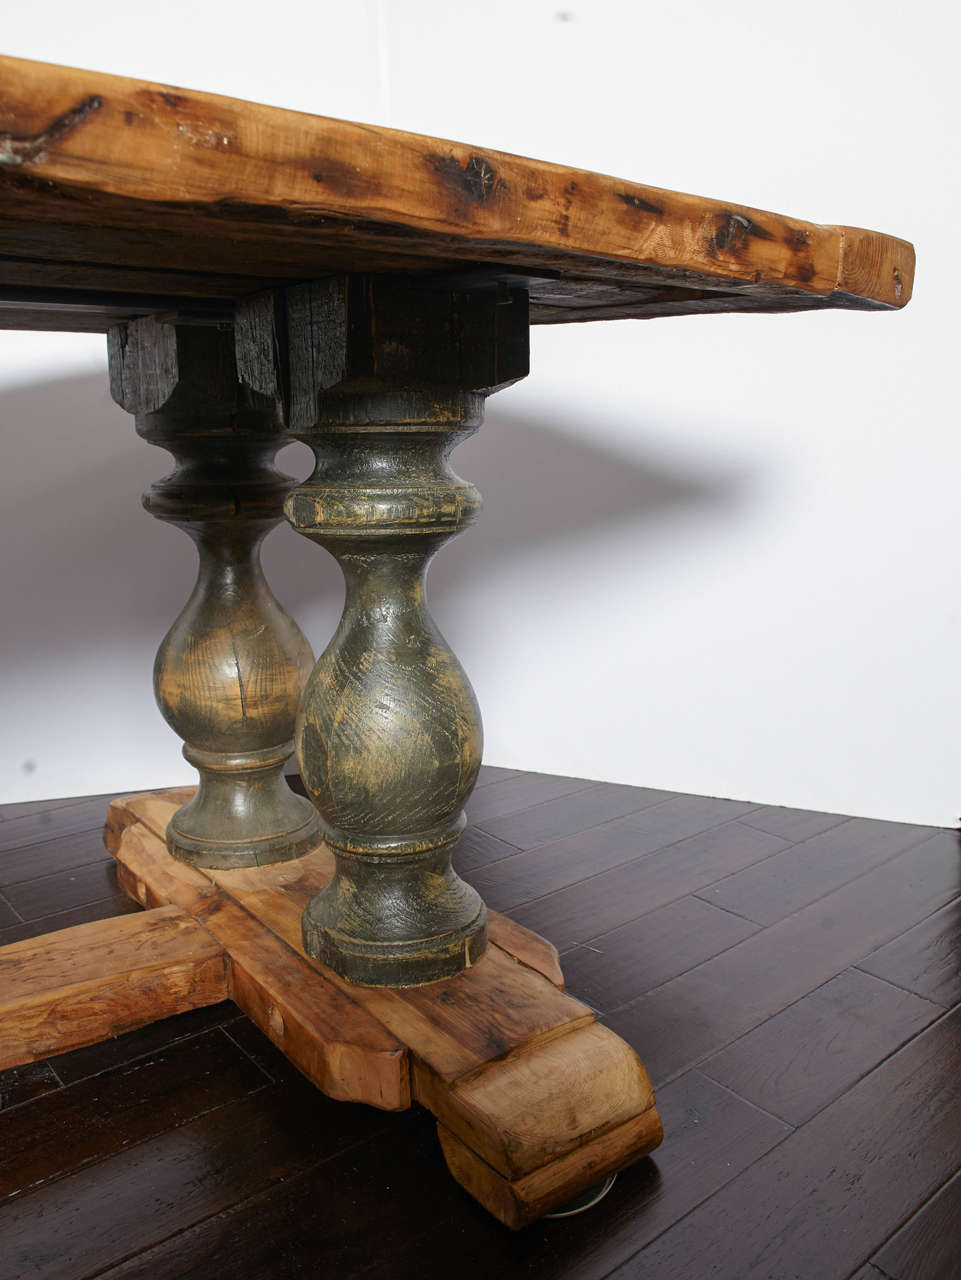 17th century style large reclaimed wood table with dark green baluster shaped legs and stretcher base.